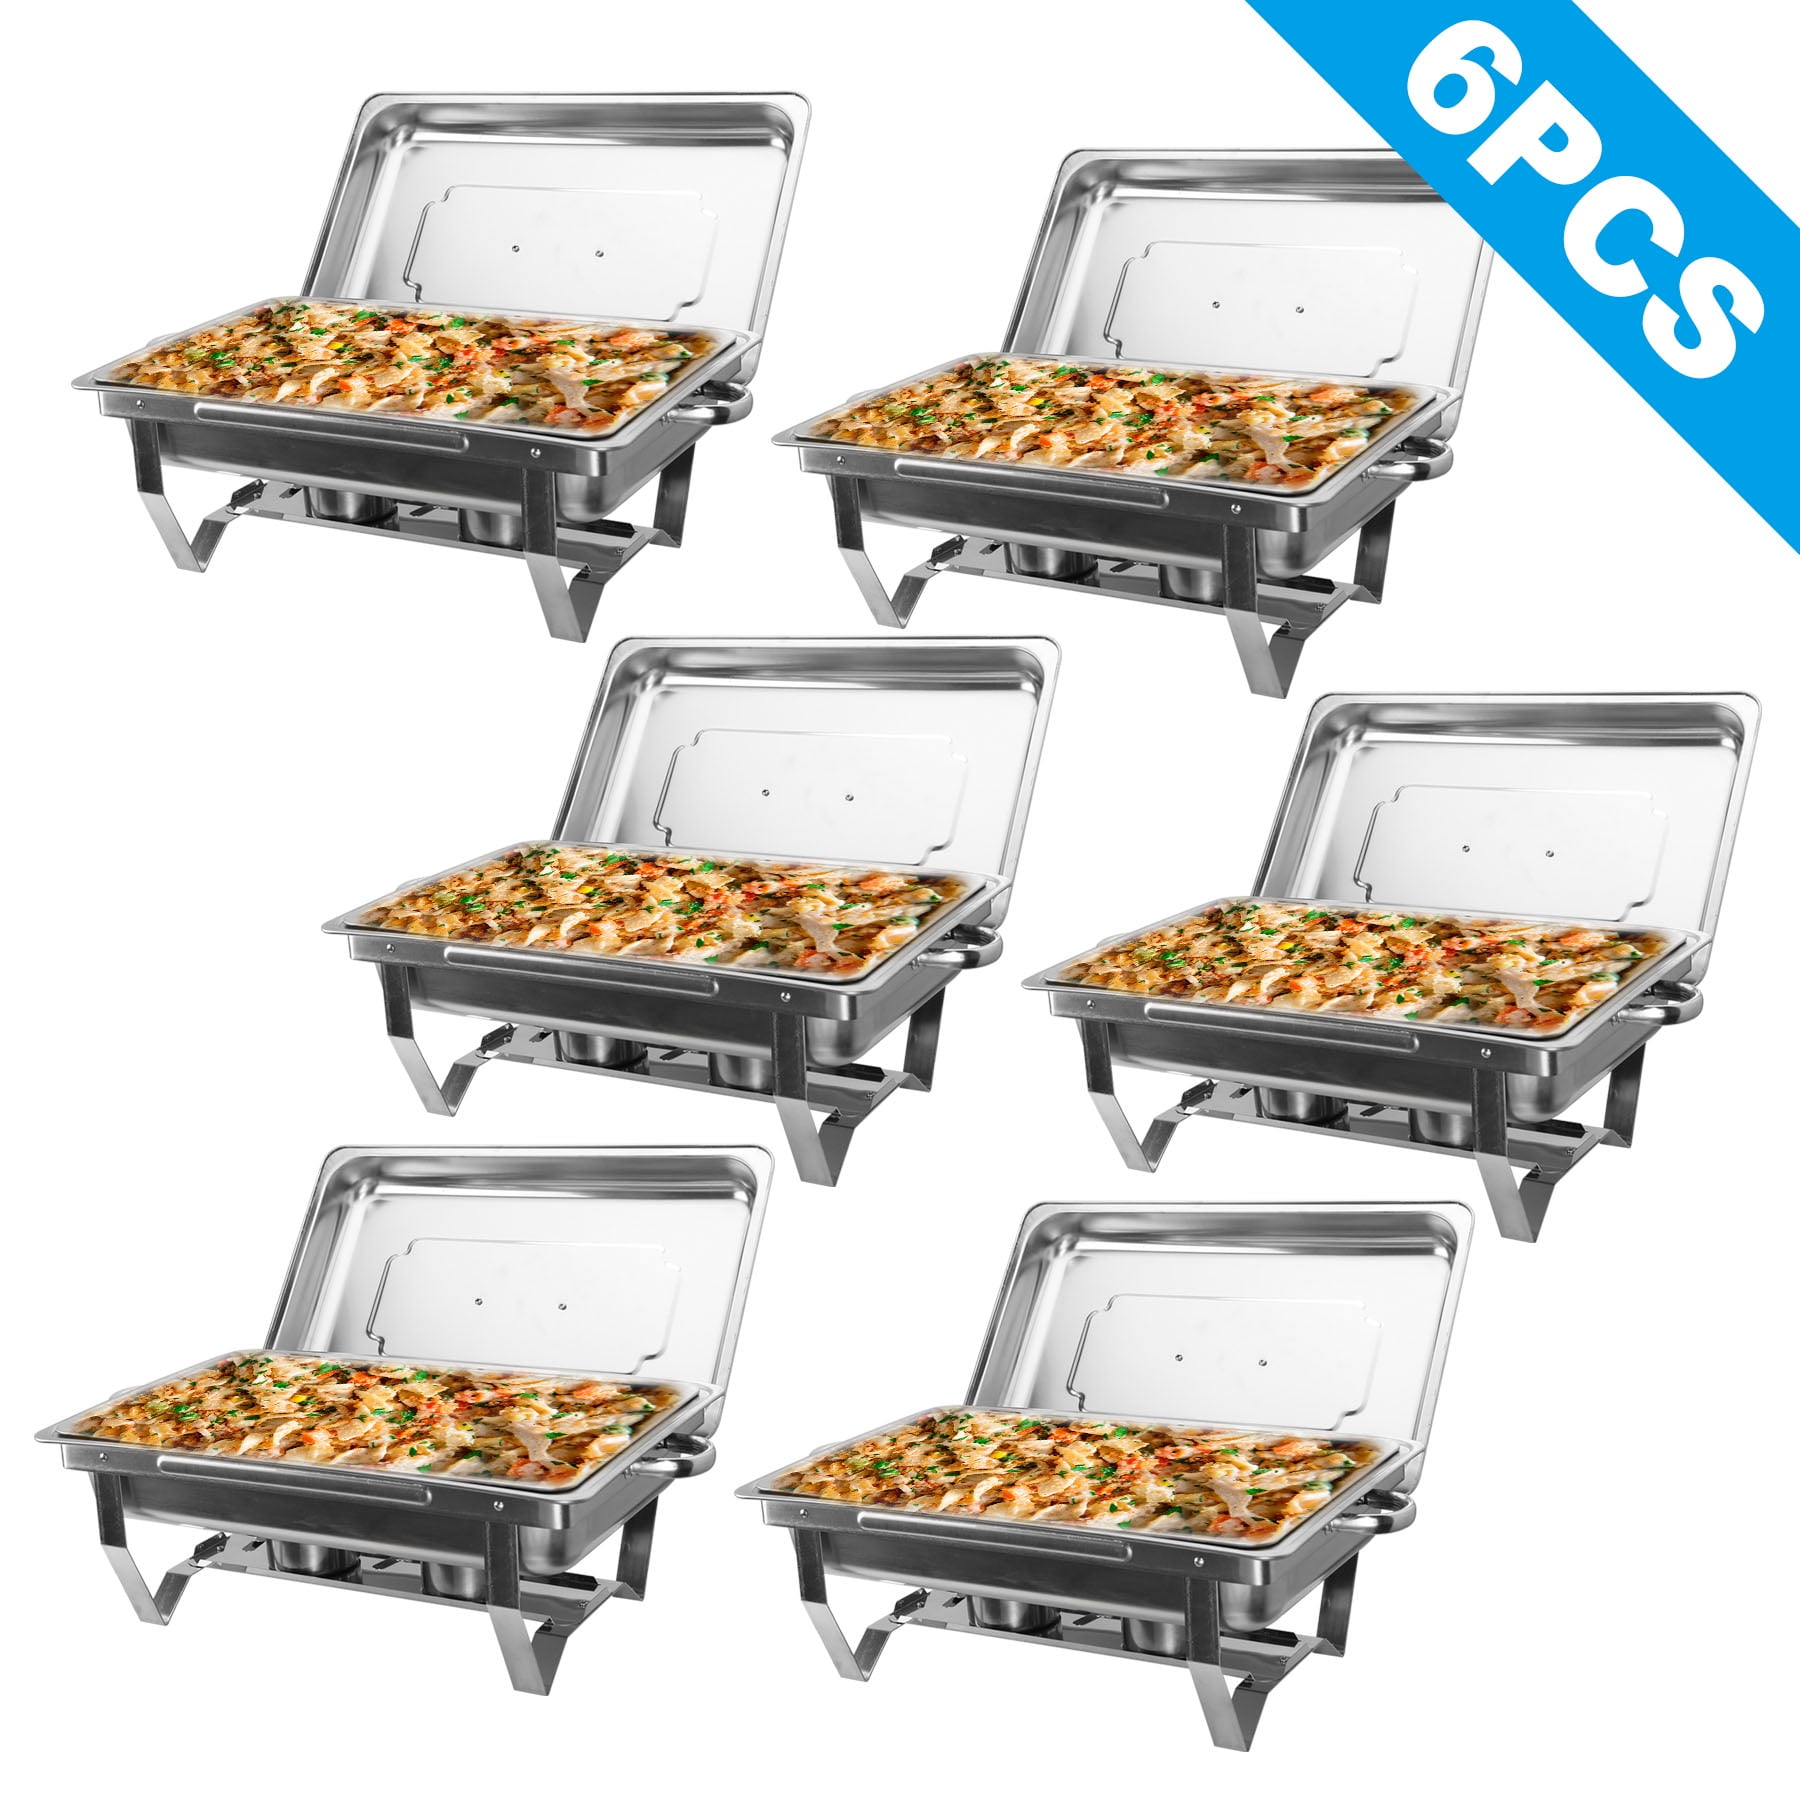 Stainless Chafing Dishes Folding Frames FAST SHIPPING! 6 PACK Full Size 8 Qt 